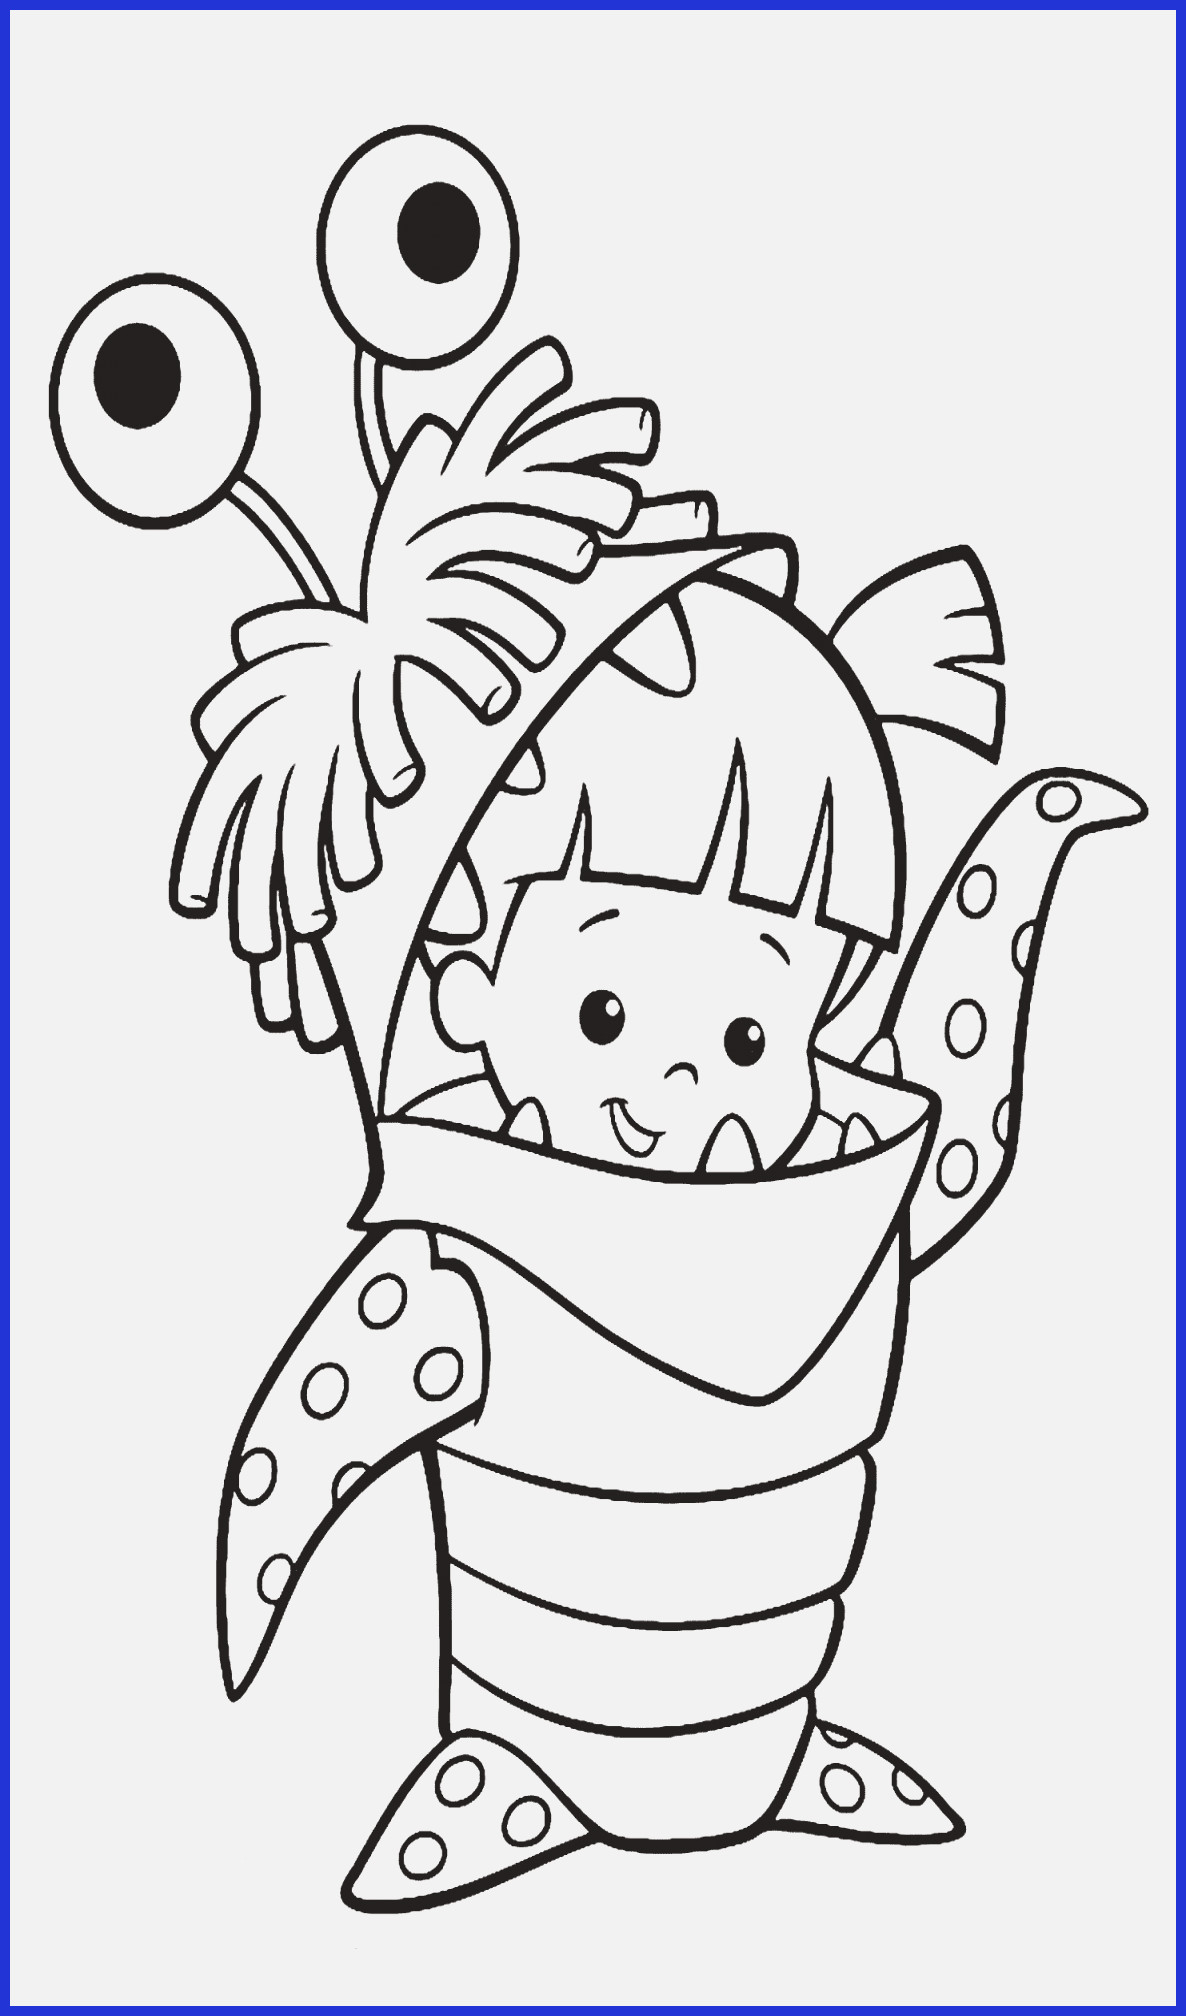 Moshi Monster Coloring Pages Monsters Inc Halloween Coloring Pages Moshi Monsters Coloring Pages